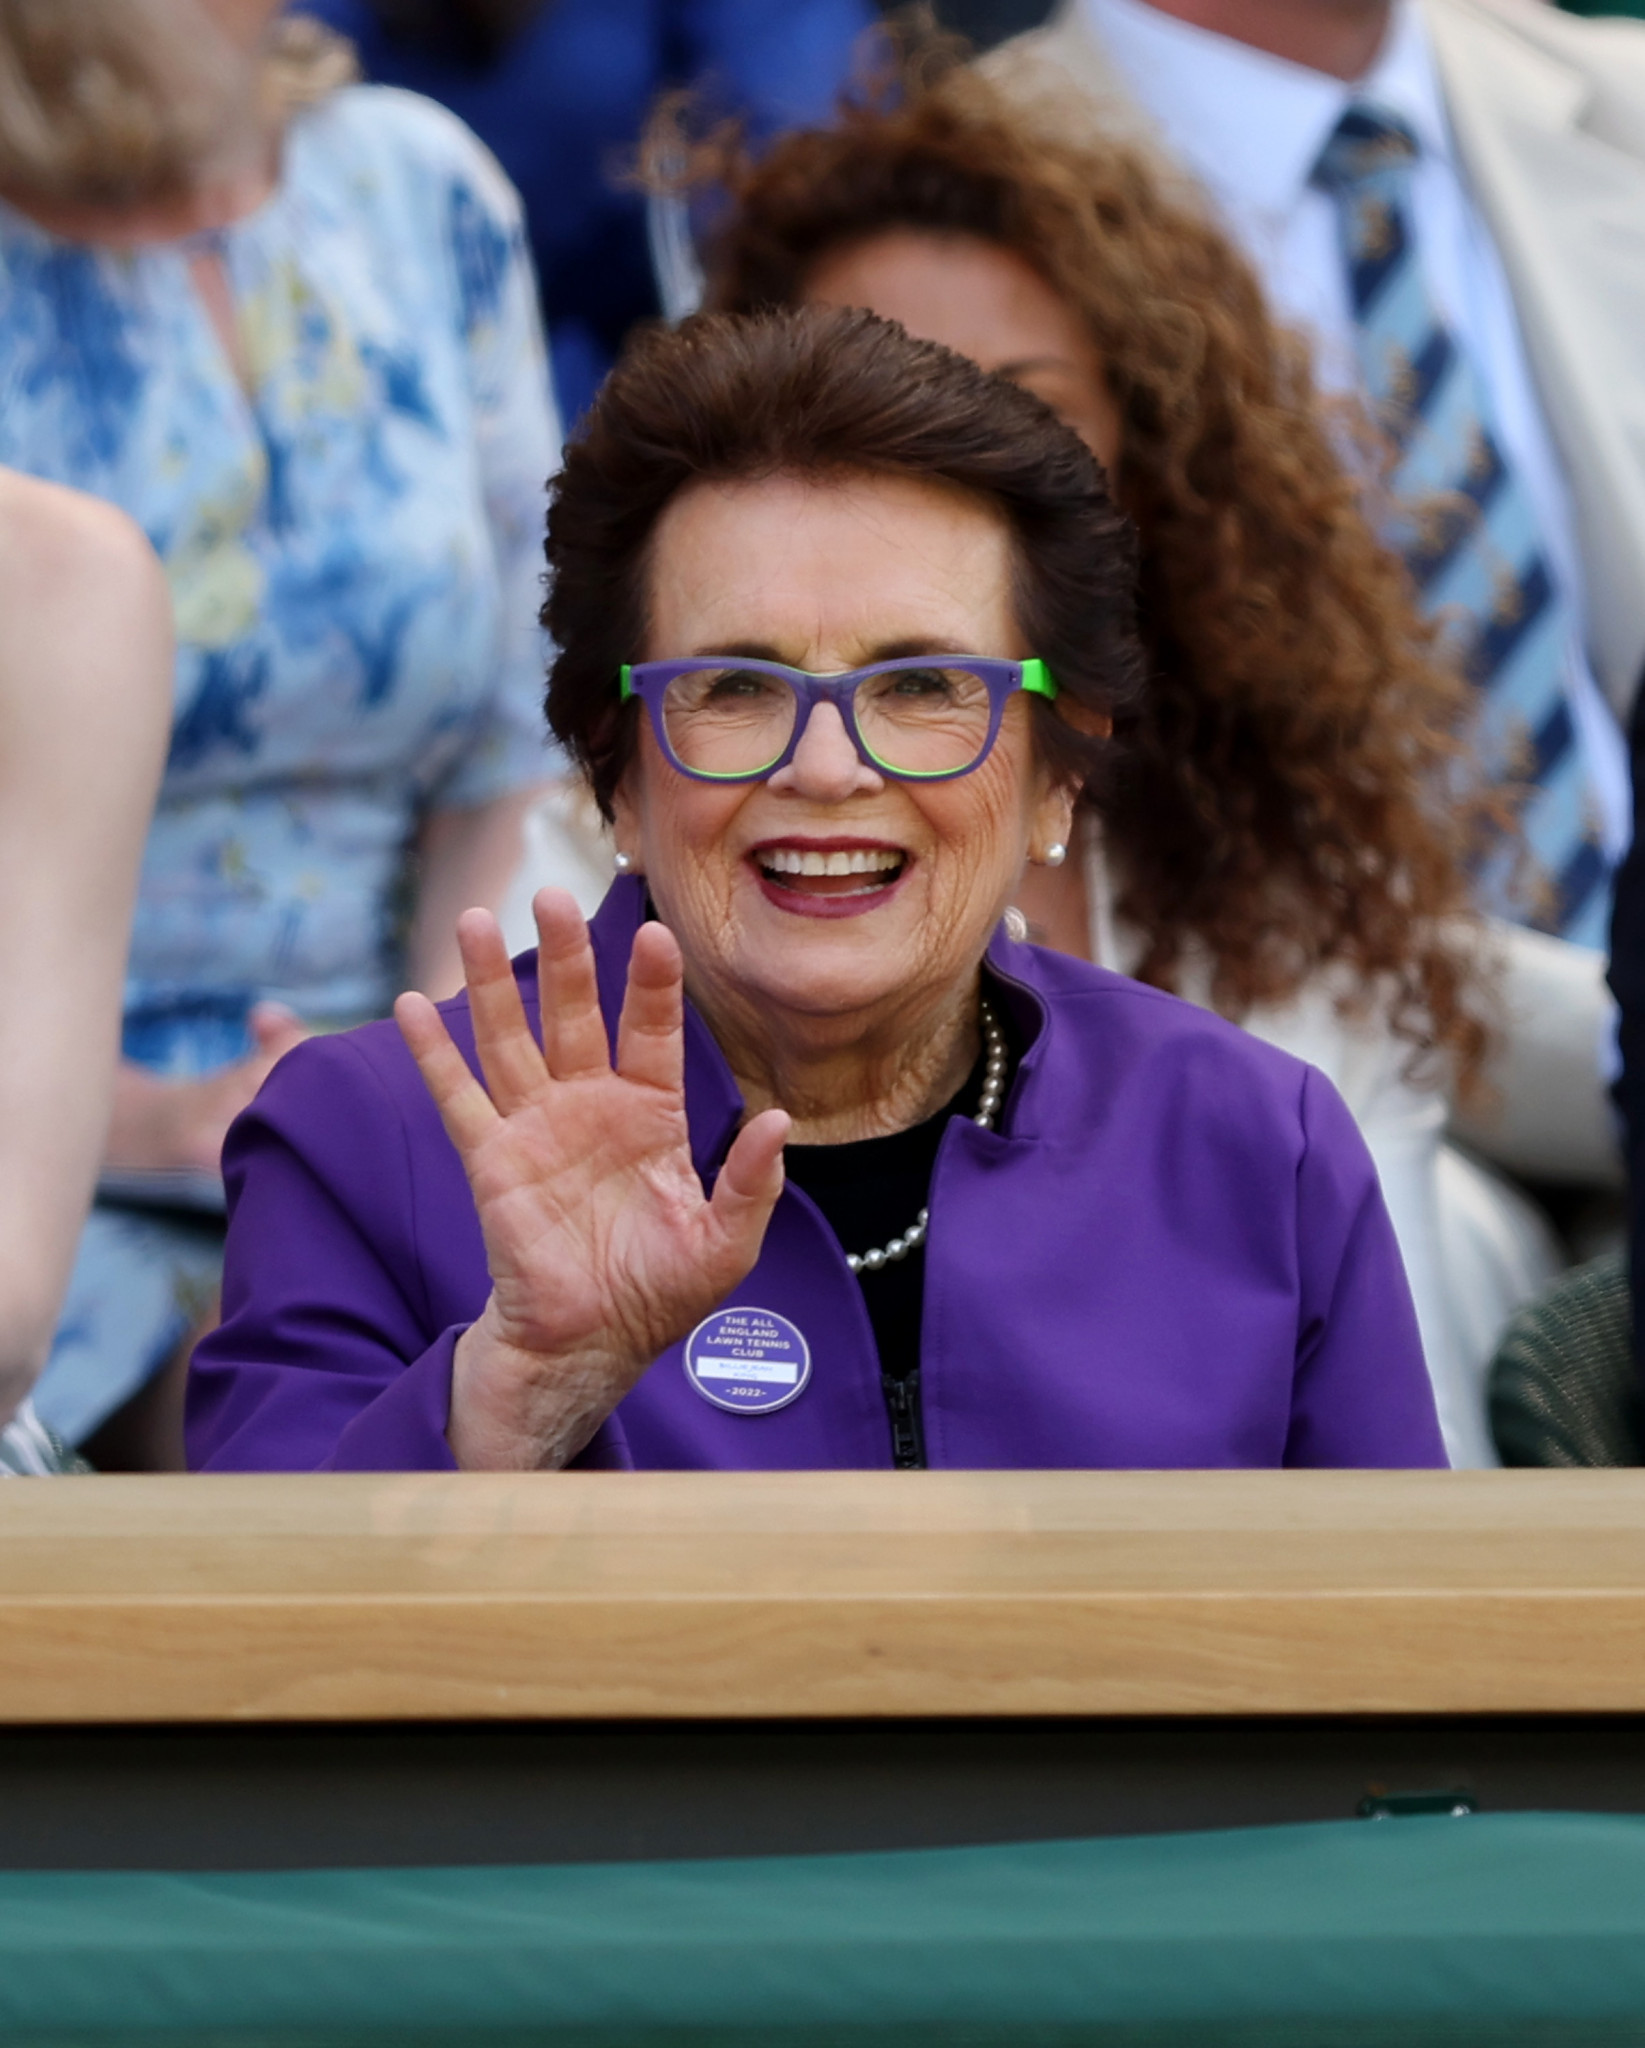 Billie Jean King, the 12-time Grand Slam winner, was present at Centre Court ©Getty Images